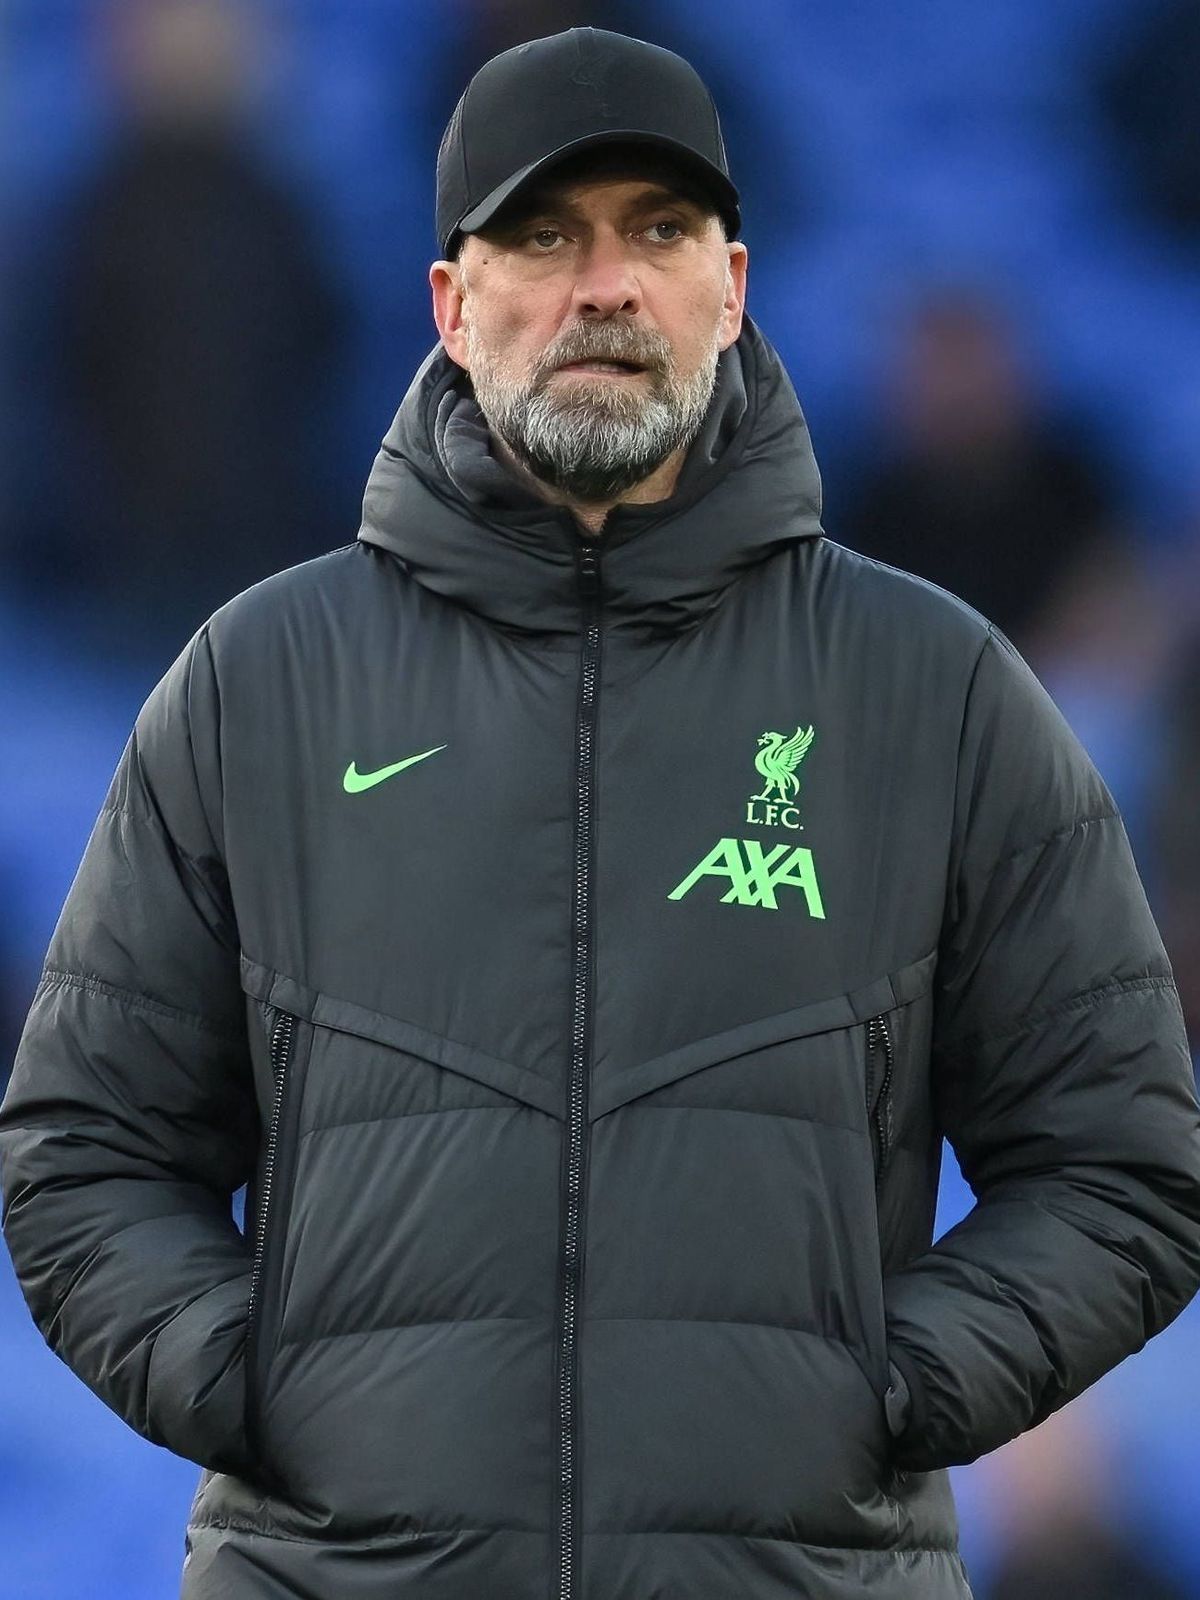 Premier League Everton v Liverpool Jürgen Klopp Manager of Liverpool looks on in the pregame warmup session during the Premier League match Everton vs Liverpool at Goodison Park, Liverpool, United ...